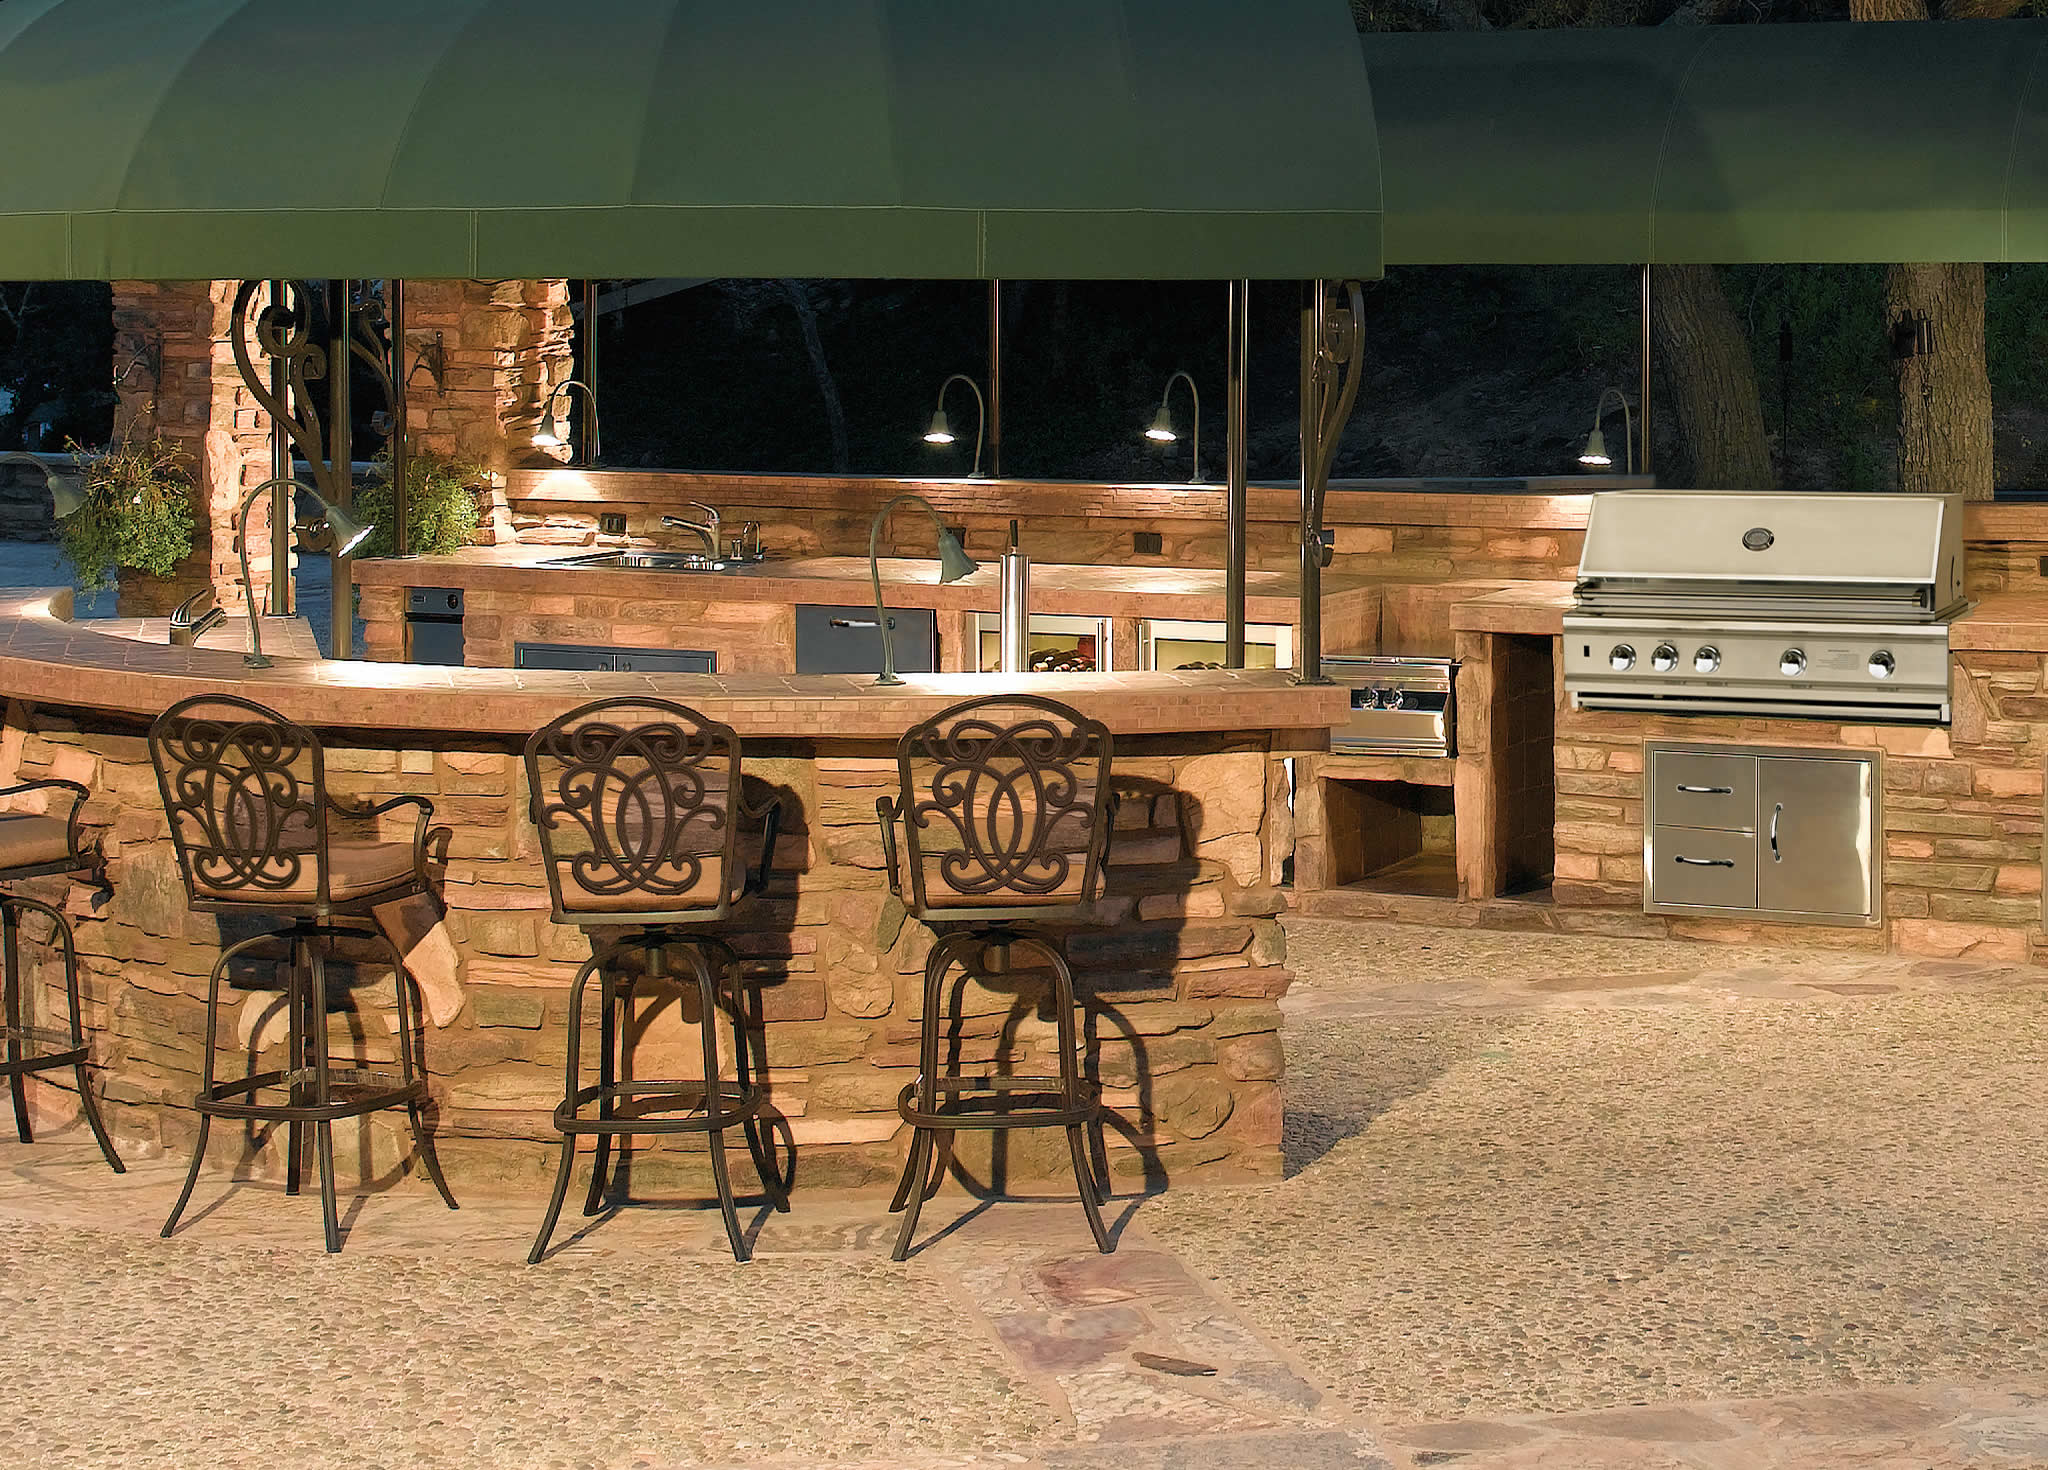 curved bar front outdoor kitchen with bar